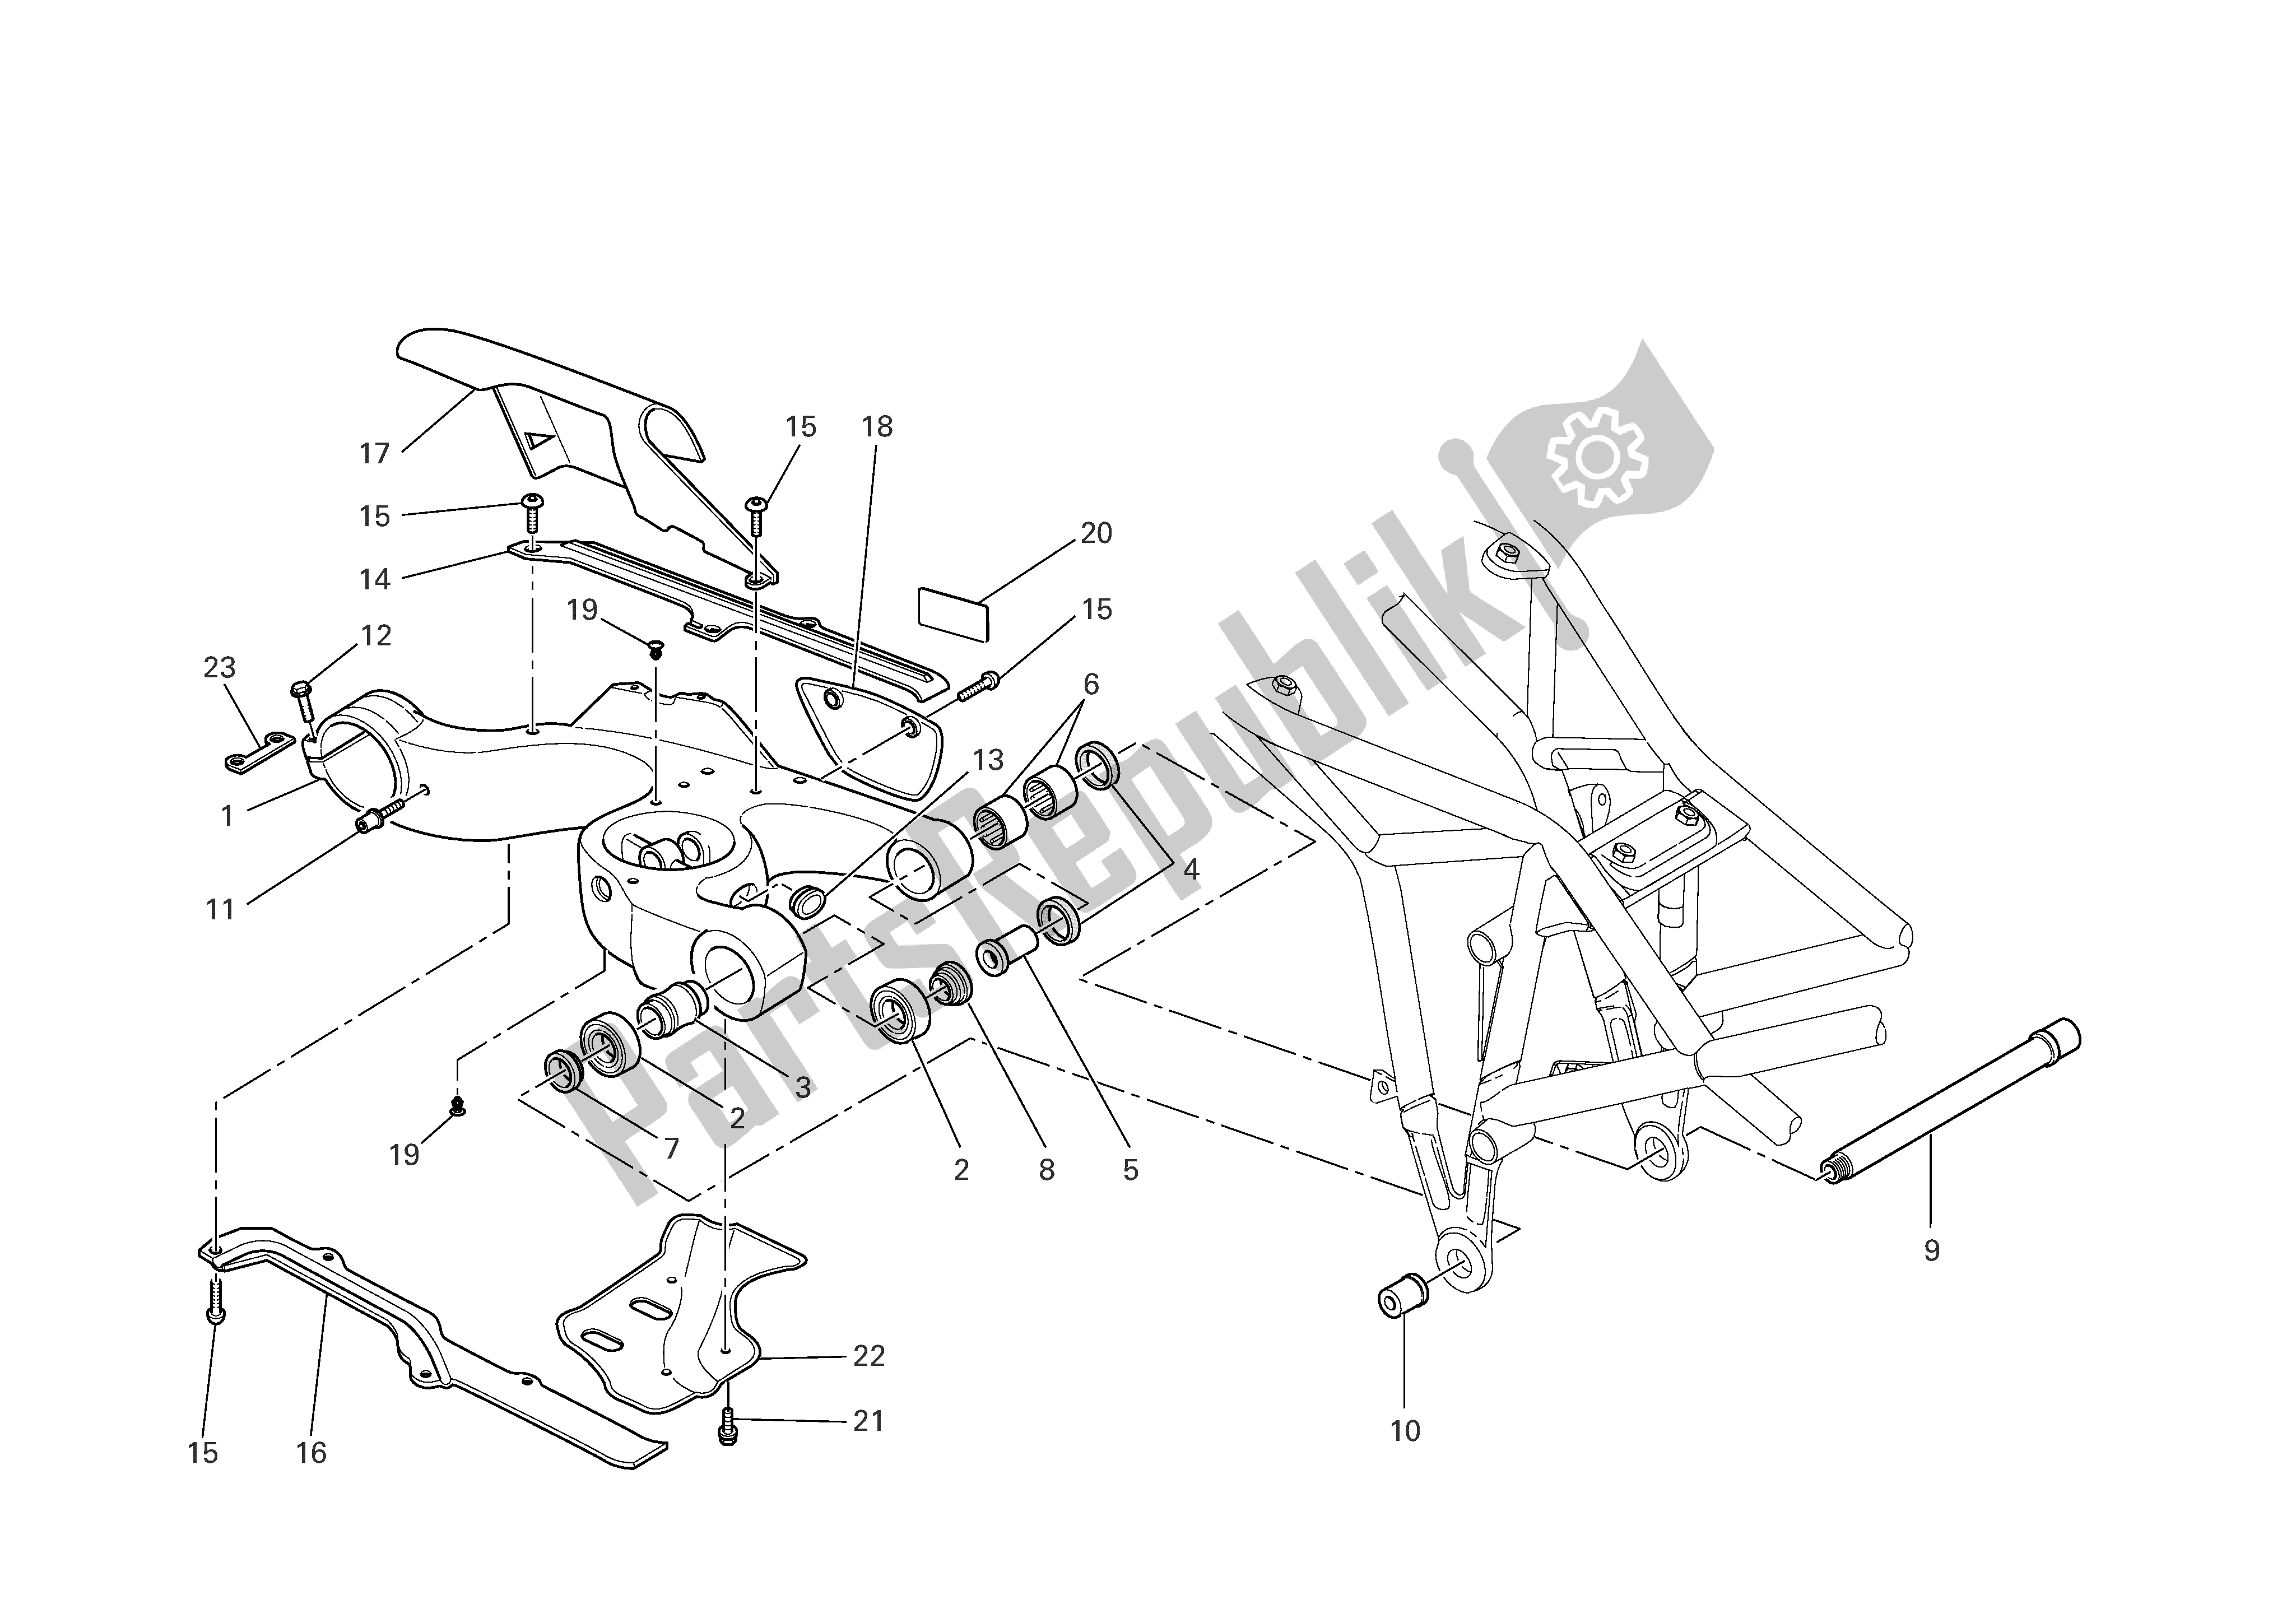 All parts for the Swingarm of the Ducati Multistrada 1000 2005